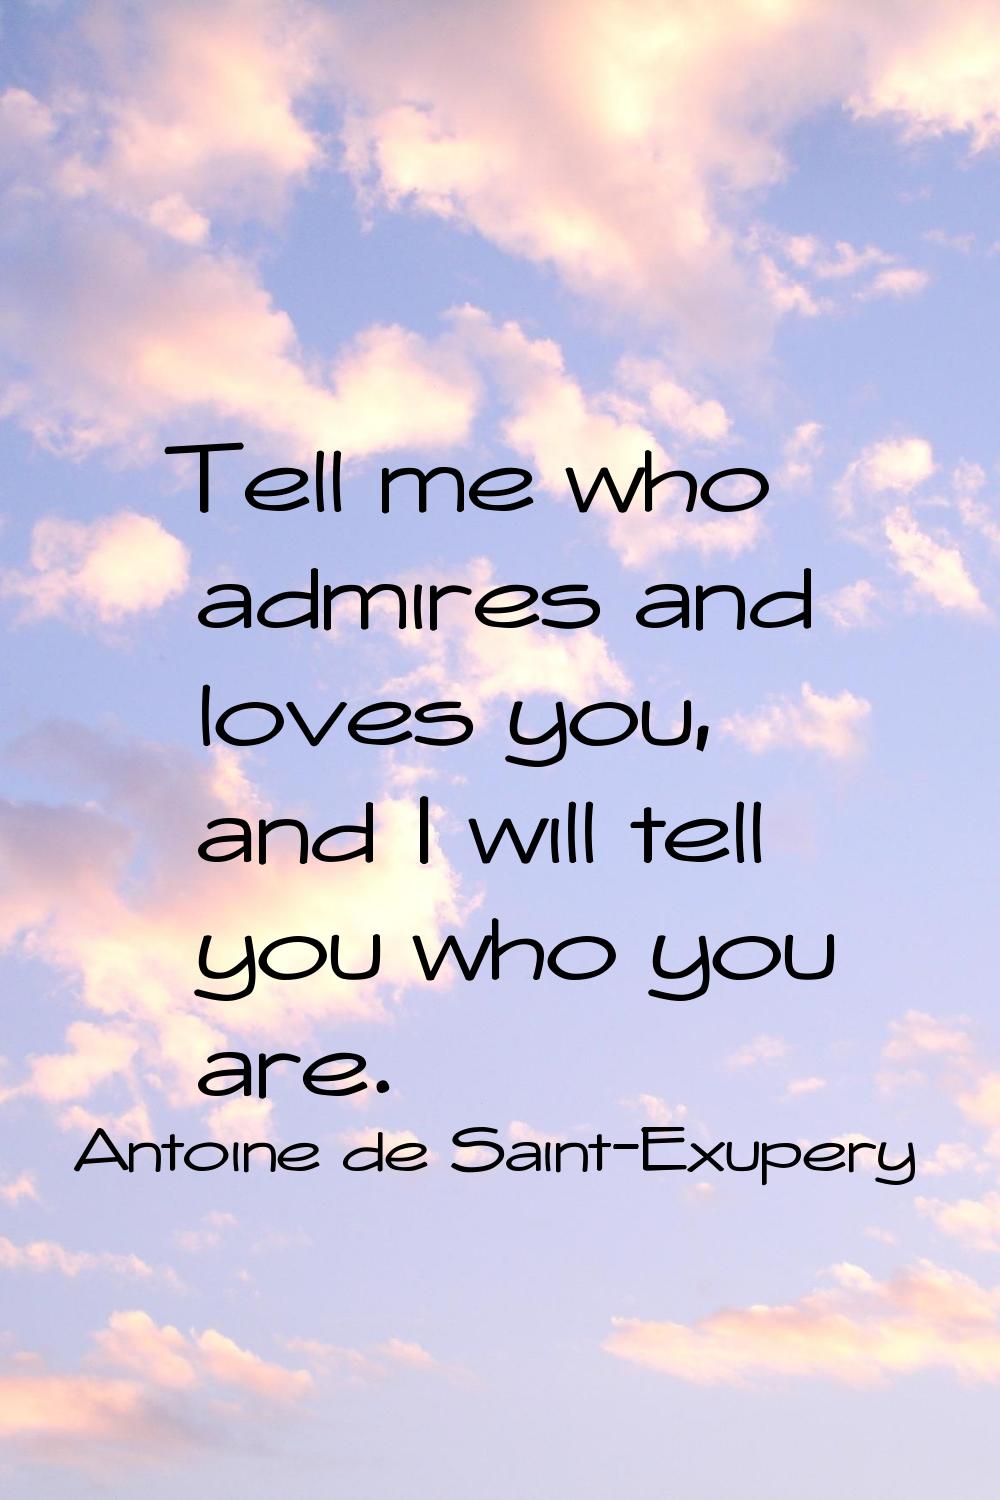 Tell me who admires and loves you, and I will tell you who you are.